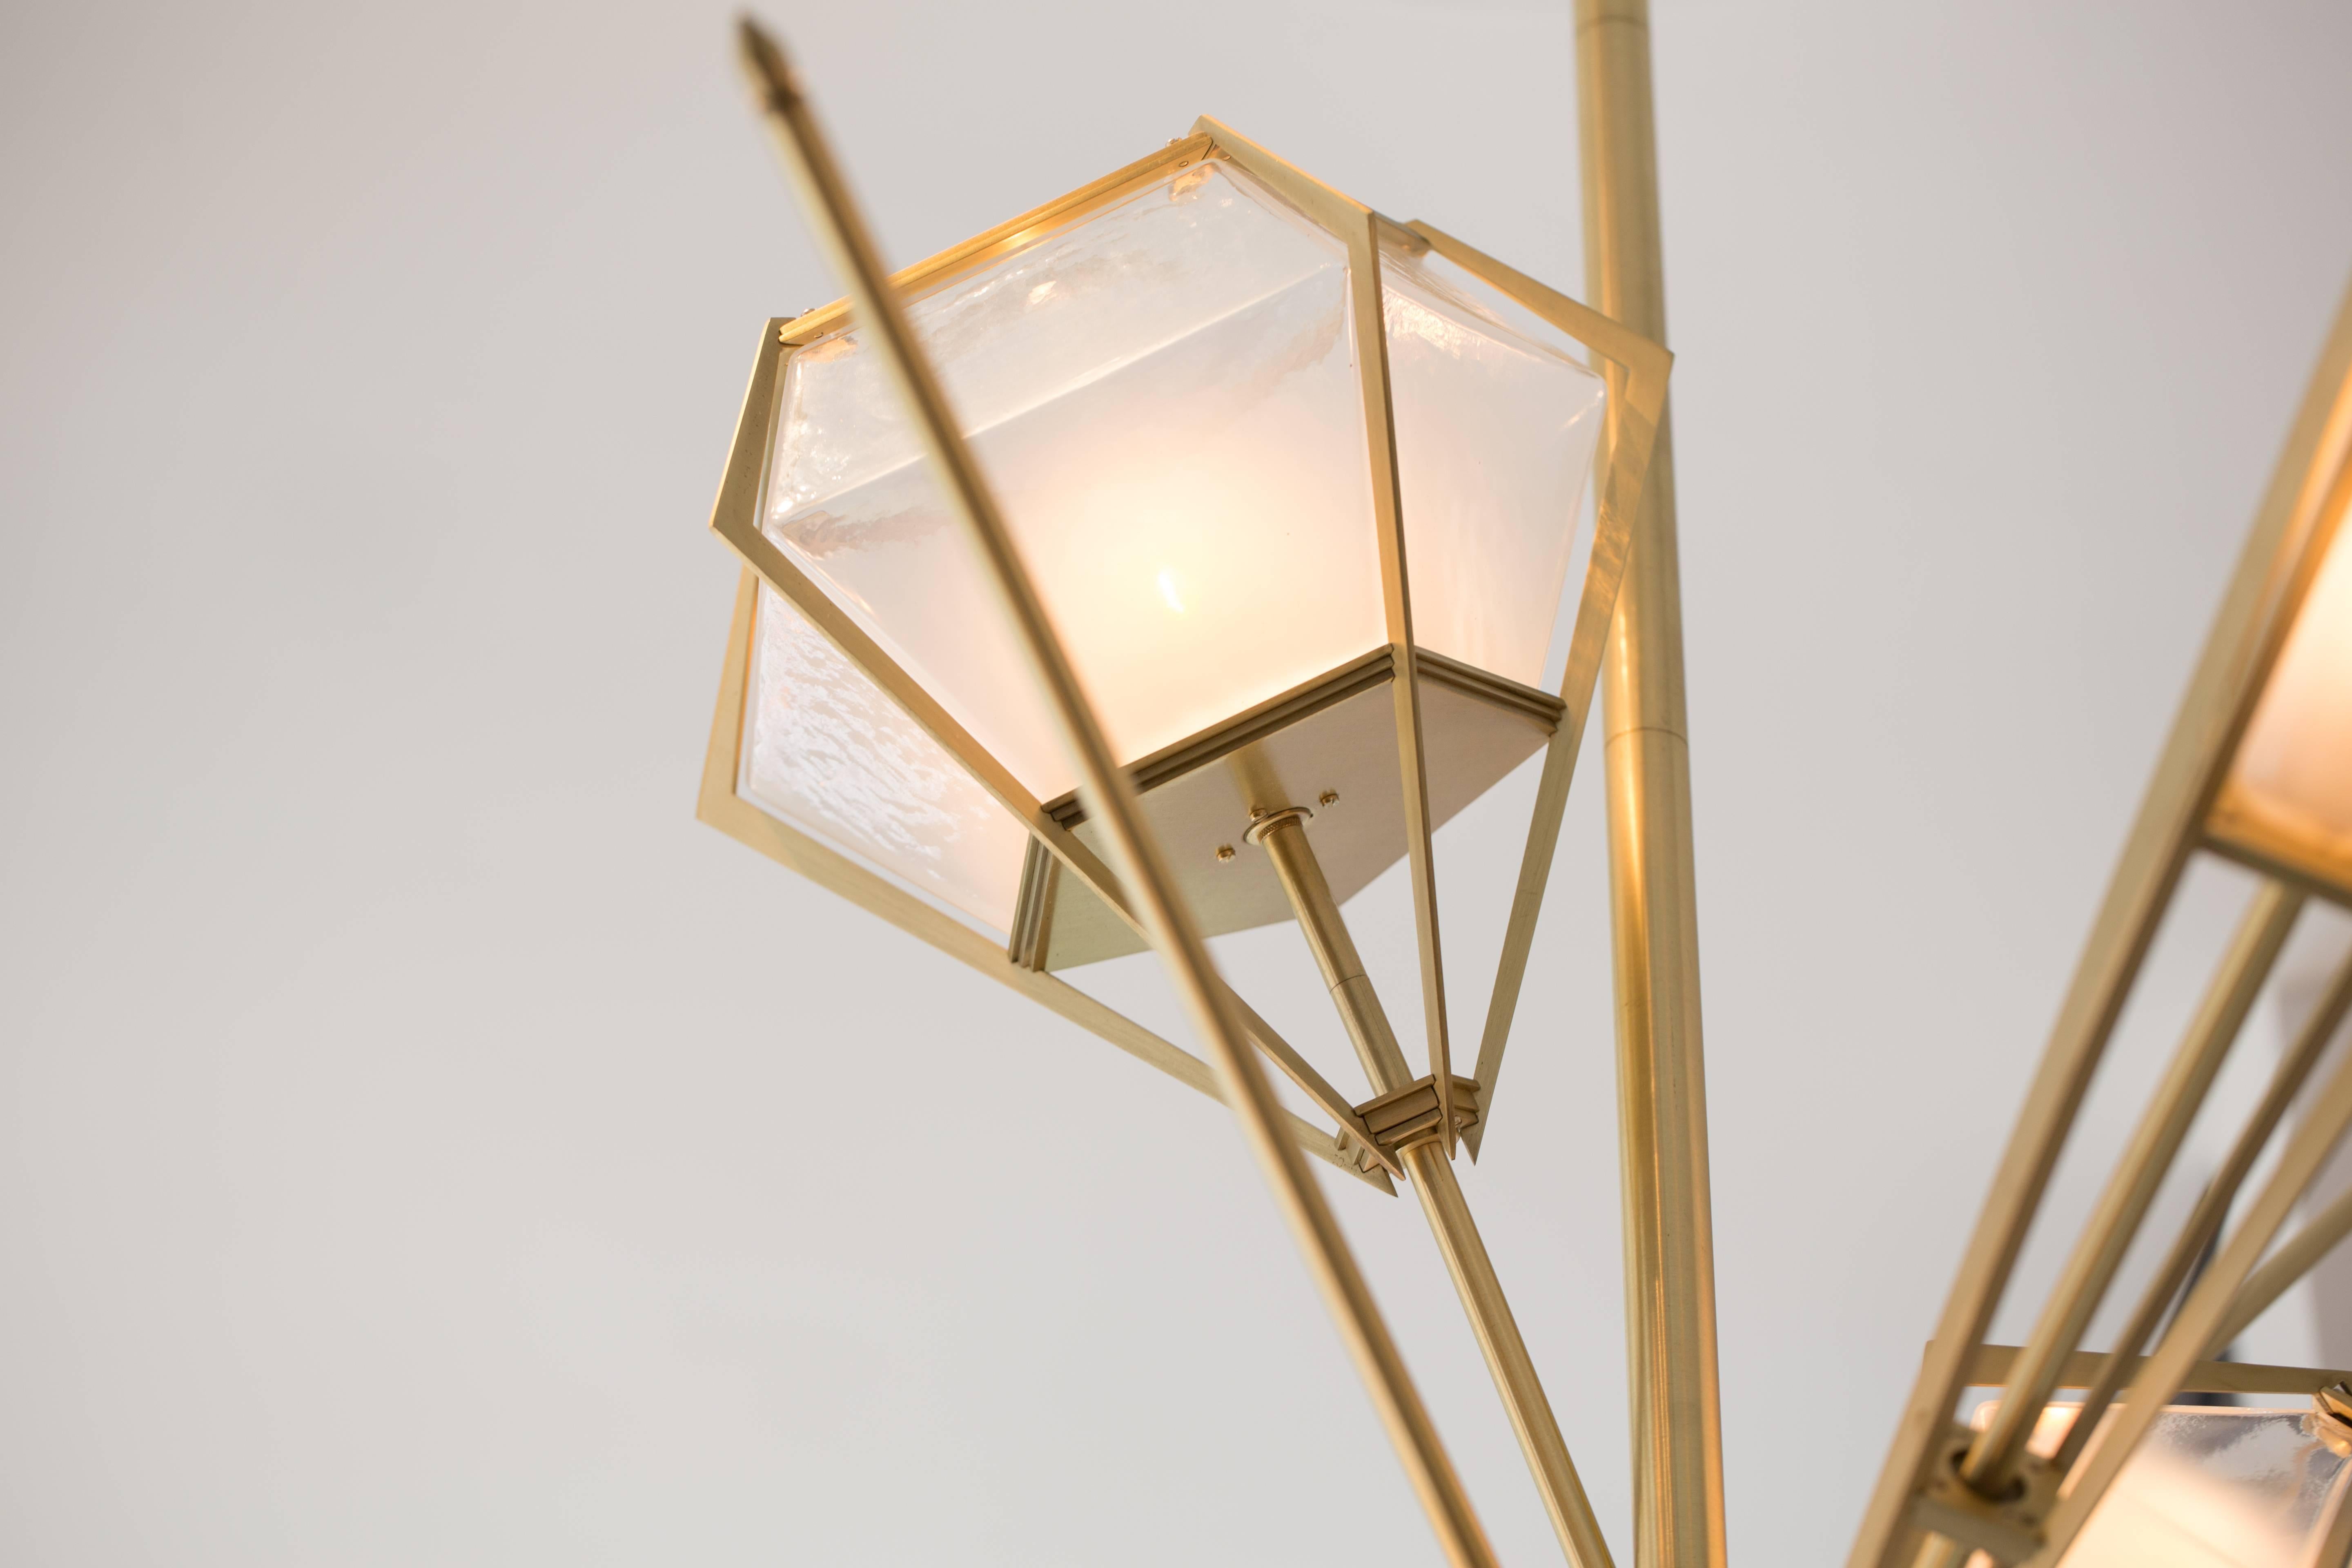 Elegant sculptural light-fixture inspired by jewelry design featuring a mold-blown glass gem in a chic metallic setting to create an asymmetrical starburst of light.
Harlow is available in various color ways, and held in a metallic frame referencing